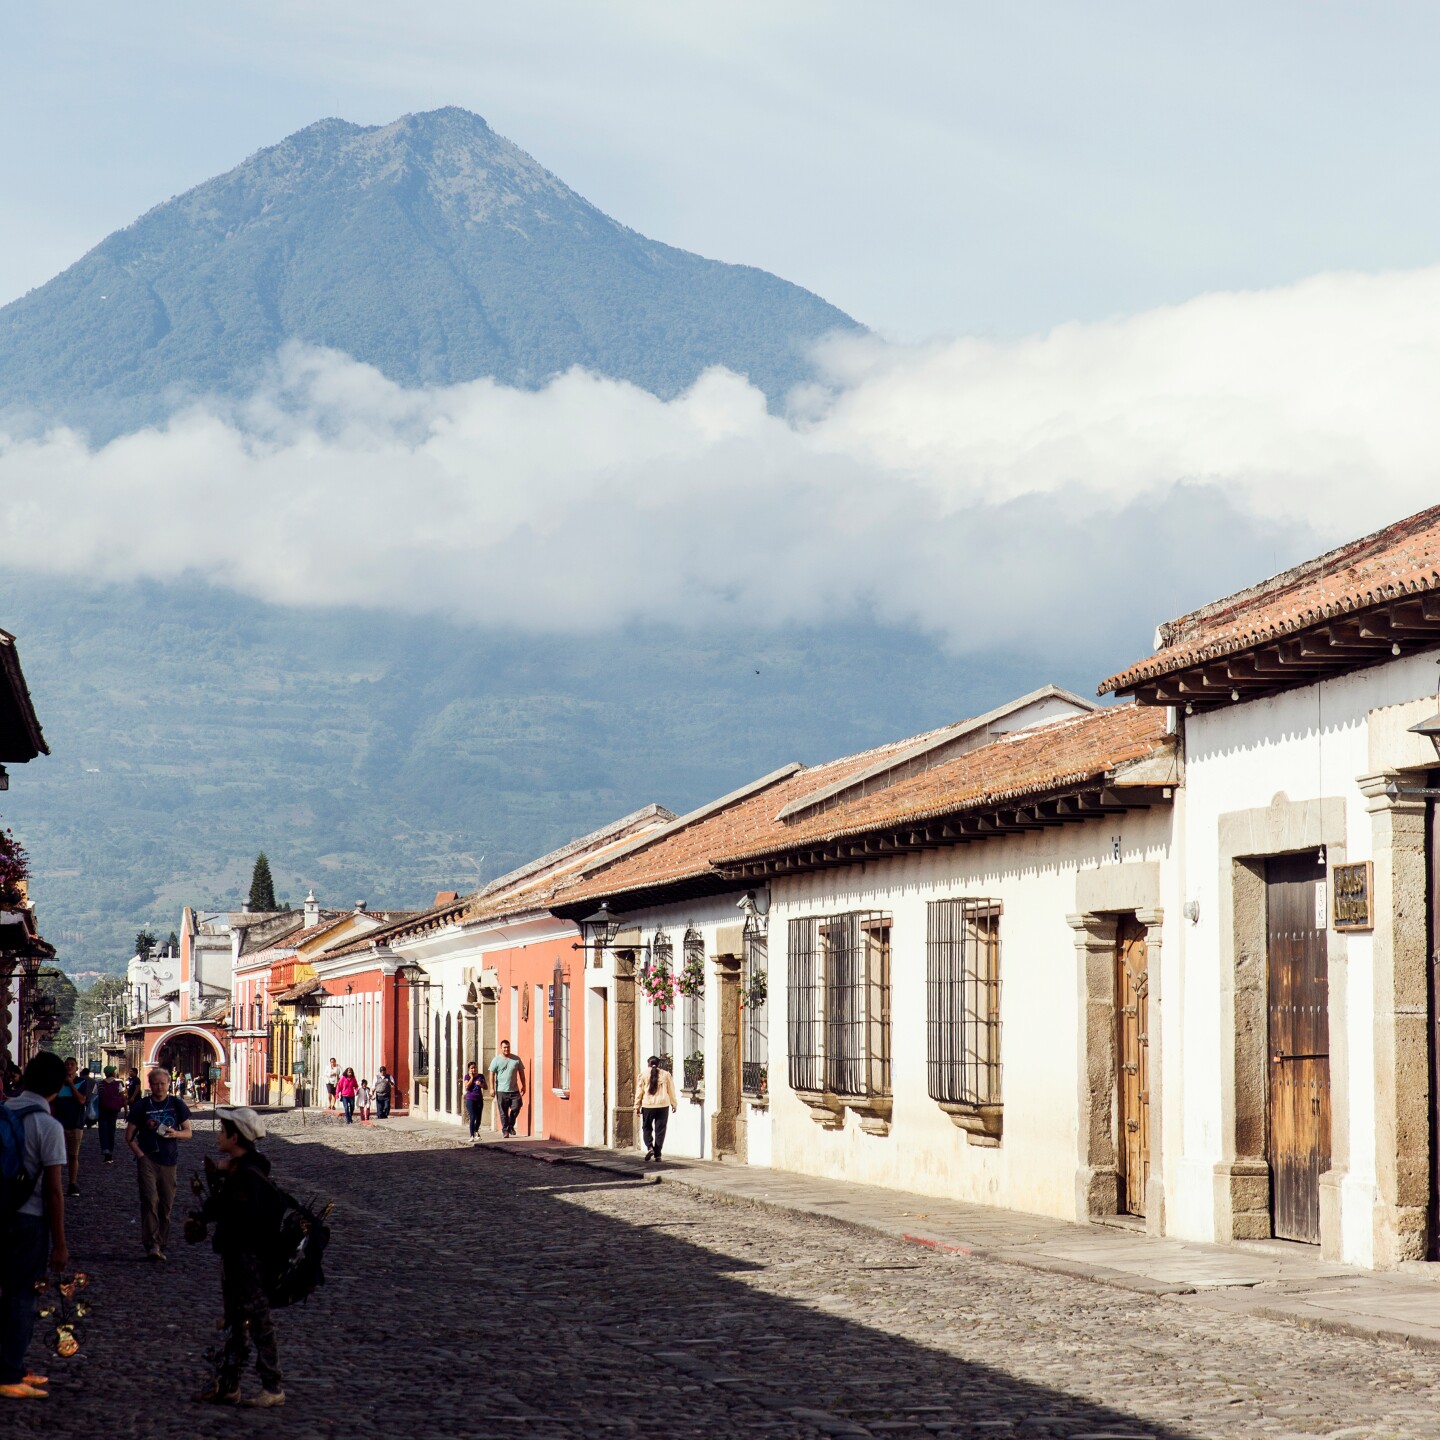 <h2>5. Guatemala</h2> <p>Mayan ruins, colorful cities, volcanoes, lakes, and black-sand beaches—there is much to love in Guatemala. With a low cost of living and a transportation infrastructure that is well set up to shuttle travelers around—whether in buses, <i>colectivos</i>, or taxis—it’s surprising that this Central American country has stayed under the radar.</p> <p>Most travelers associate Mayan culture with Mexico’s Yucatan Peninsula, but Guatemala is one of the best places to dig into that ancient past. It’s home to more than 1,500 Mayan ruins, the most famous of them being <a class="Link" href="https://whc.unesco.org/en/list/64/" rel="noopener">Tikal National Park</a> in northern Guatemala.</p> <p>Nature also has an integral appeal in this country: There’s Flores, a town literally plopped in the middle of Lake Peten Itza, and Antigua, a sky-high Spanish-influenced city in the mountains. Lake Atitlan, the deepest lake in Central America, is one of the most peaceful places on the planet. Plus, Guatemala is also home to Pacaya, Fuego, and Santiaguito, three still-active volcanoes.</p> <h3>Where to stay</h3> <ul>   <li>Book now: <a class="Link" href="https://lacasadelmundo.com/es/inicio/" rel="noopener">Hotel La Casa del Mundo</a></li>  </ul> <p>For wellness amenities like hot tub and sauna, plus spectacular views over Lake Atitlan, consider a stay at <a class="Link" href="https://lacasadelmundo.com/es/inicio/" rel="noopener">Hotel La Casa del Mundo</a>. Dinners are served family-style and a scenic hiking trail passes right behind the hotel.</p>